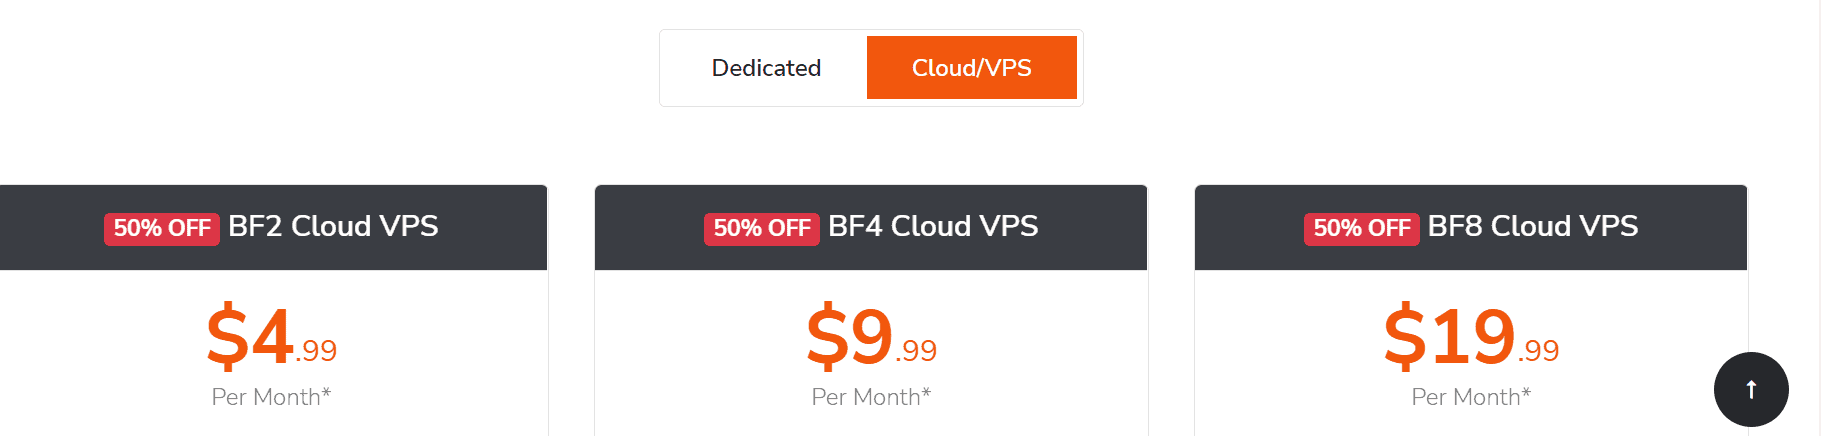 cloudvps pricing